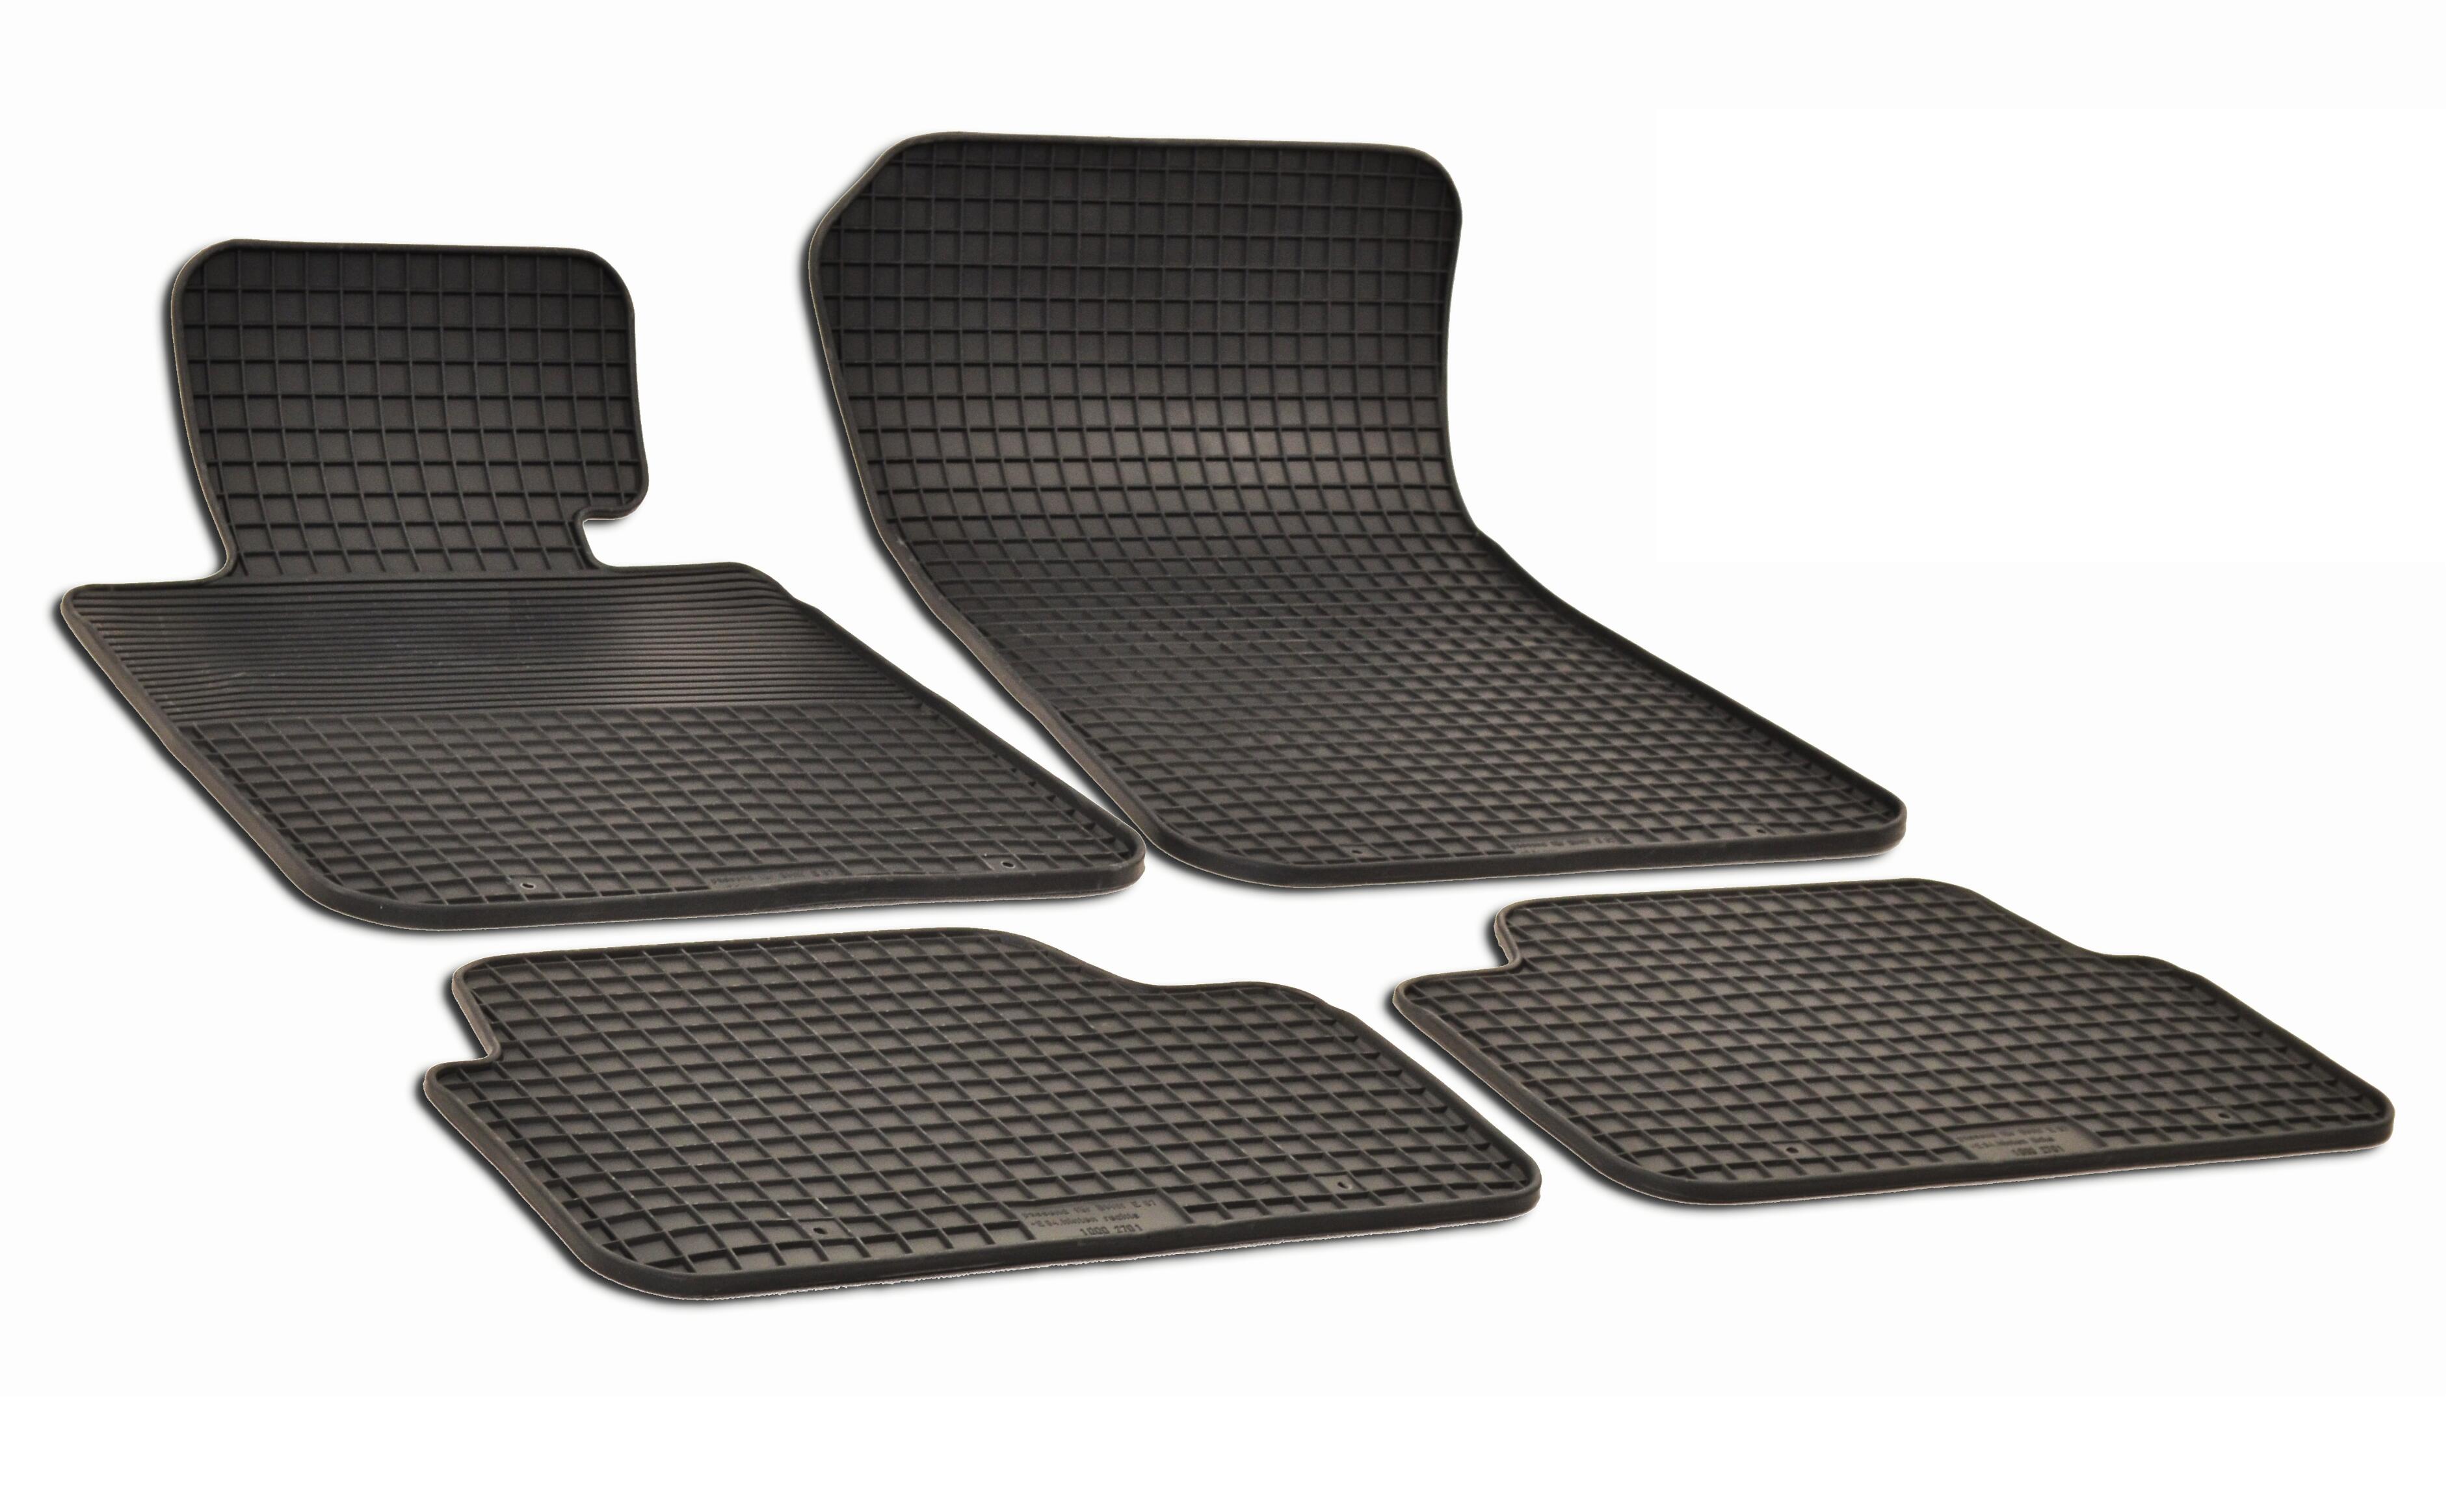 BMW Floor Mat Set - Front and Rear (All-Weather) (Black) 51472336798 - eEuro Preferred 214423FL